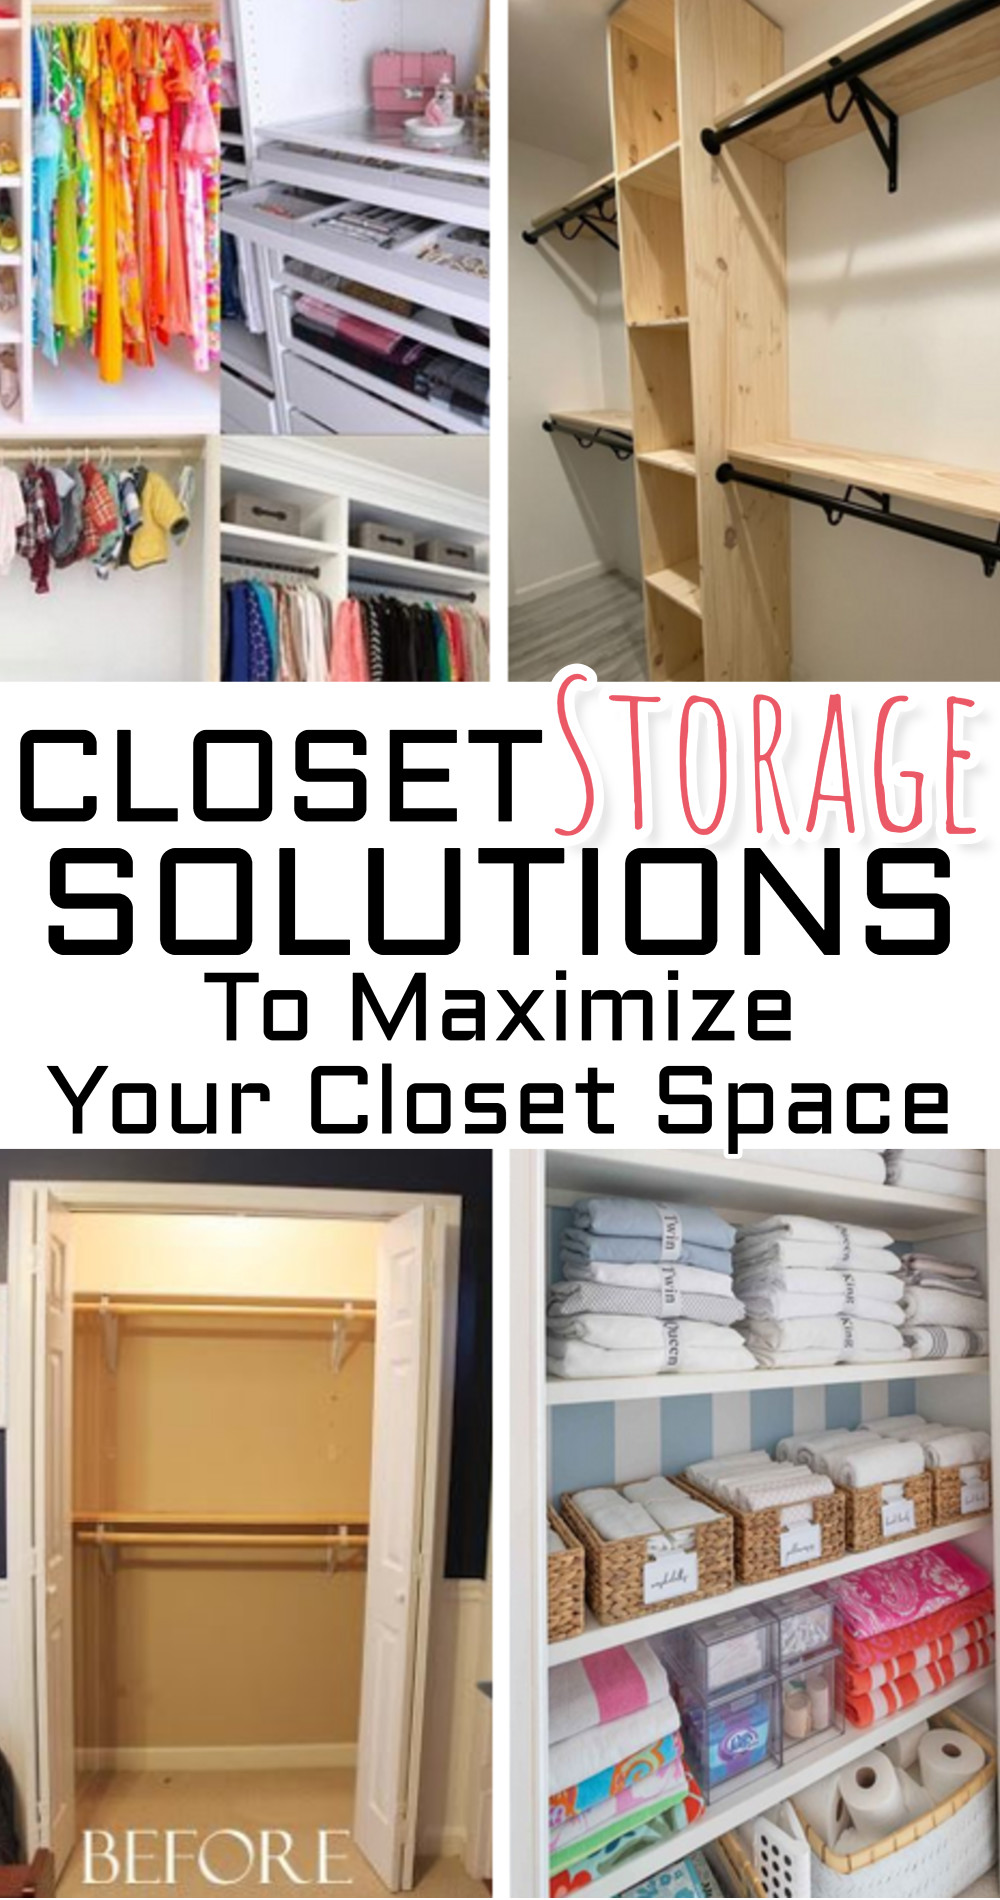 Closet Storage Solutions To Maximize Closet Space And Stay Organized